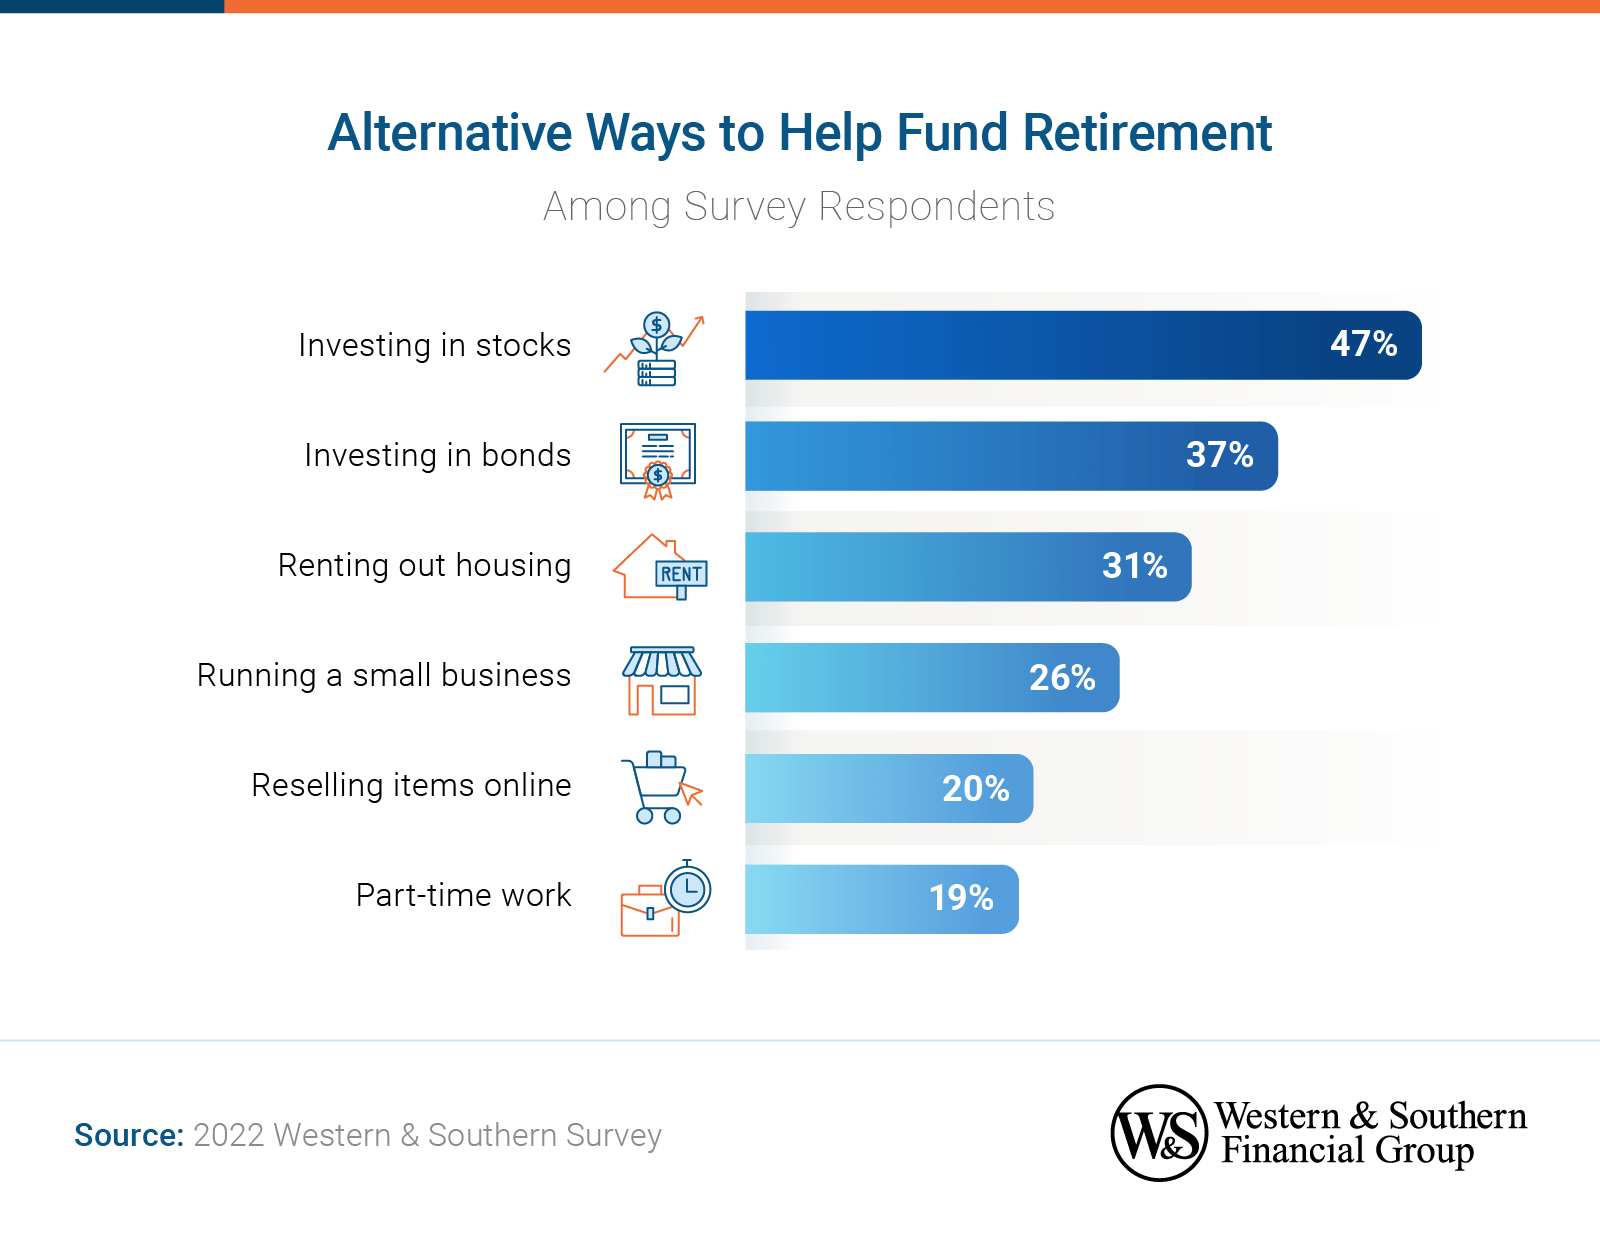 Running a small business makes up only 26% surveyed as an alternative way to help fund retirement.